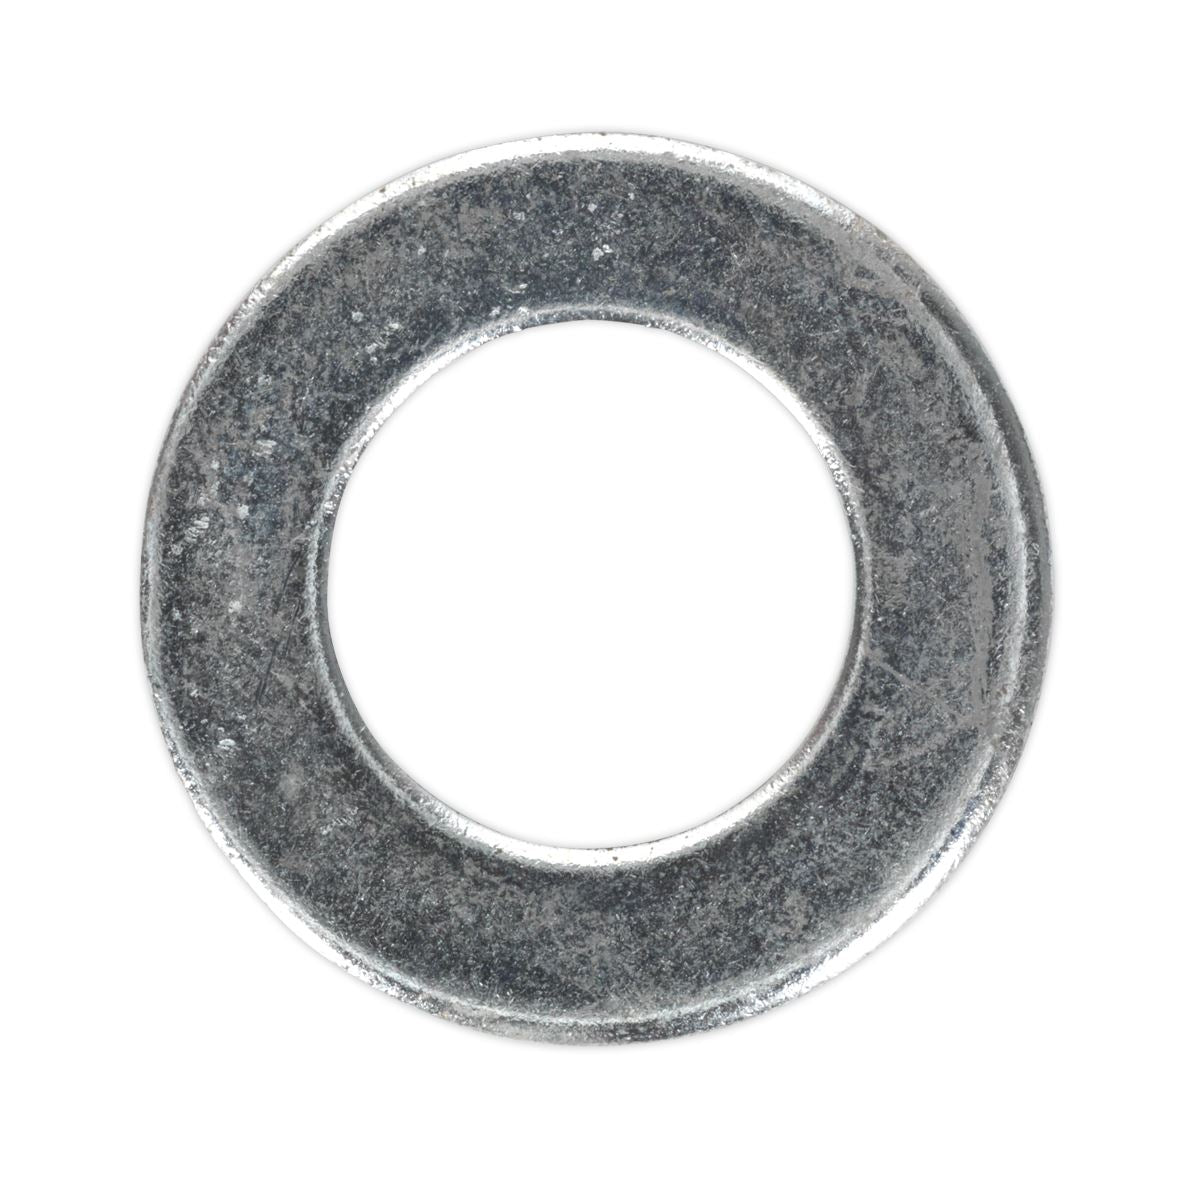 Sealey Flat Washer DIN 125 M20 x 37mm Form A Zinc Pack of 50